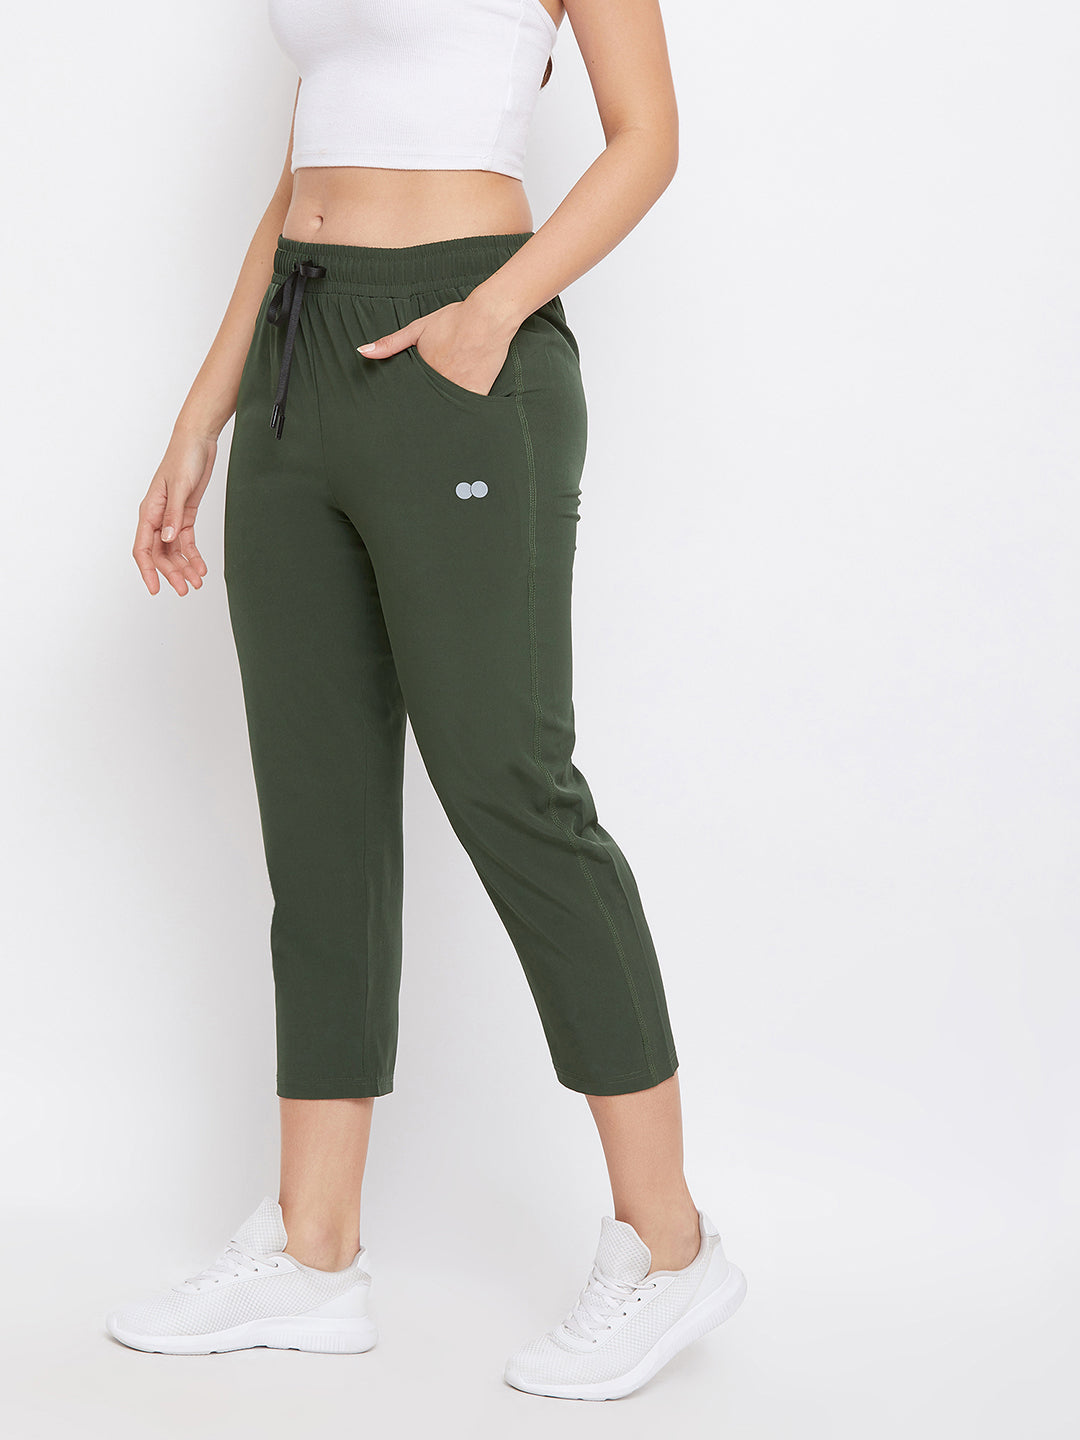 Olive Green Comfort Fit Angle-Length Jogger